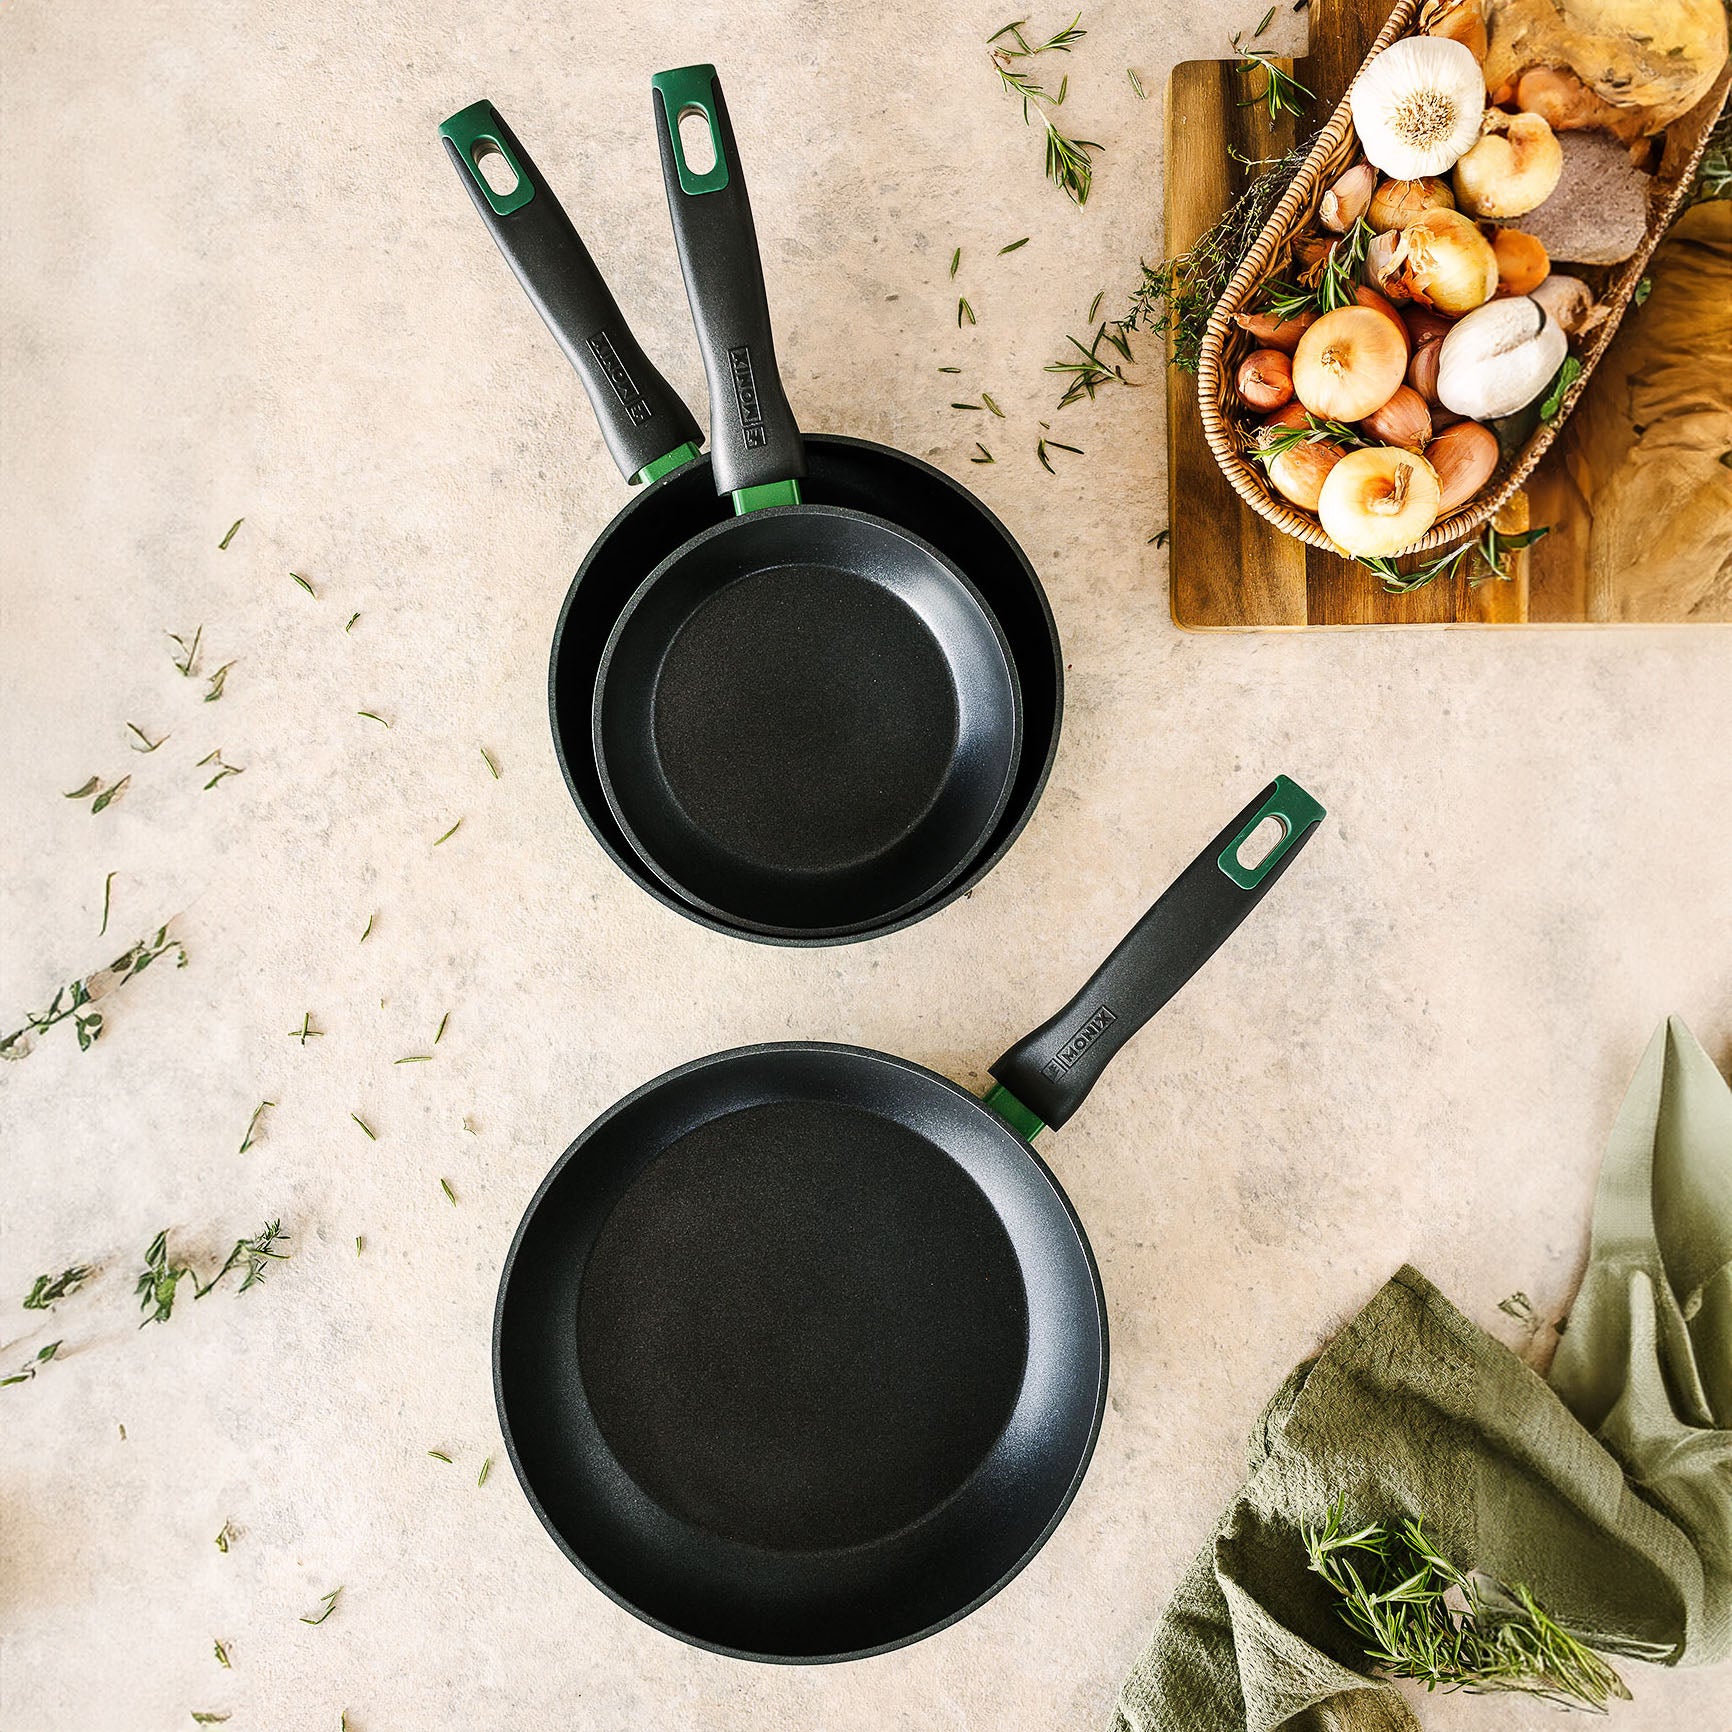 Forest Frying Pan, 3-piece set